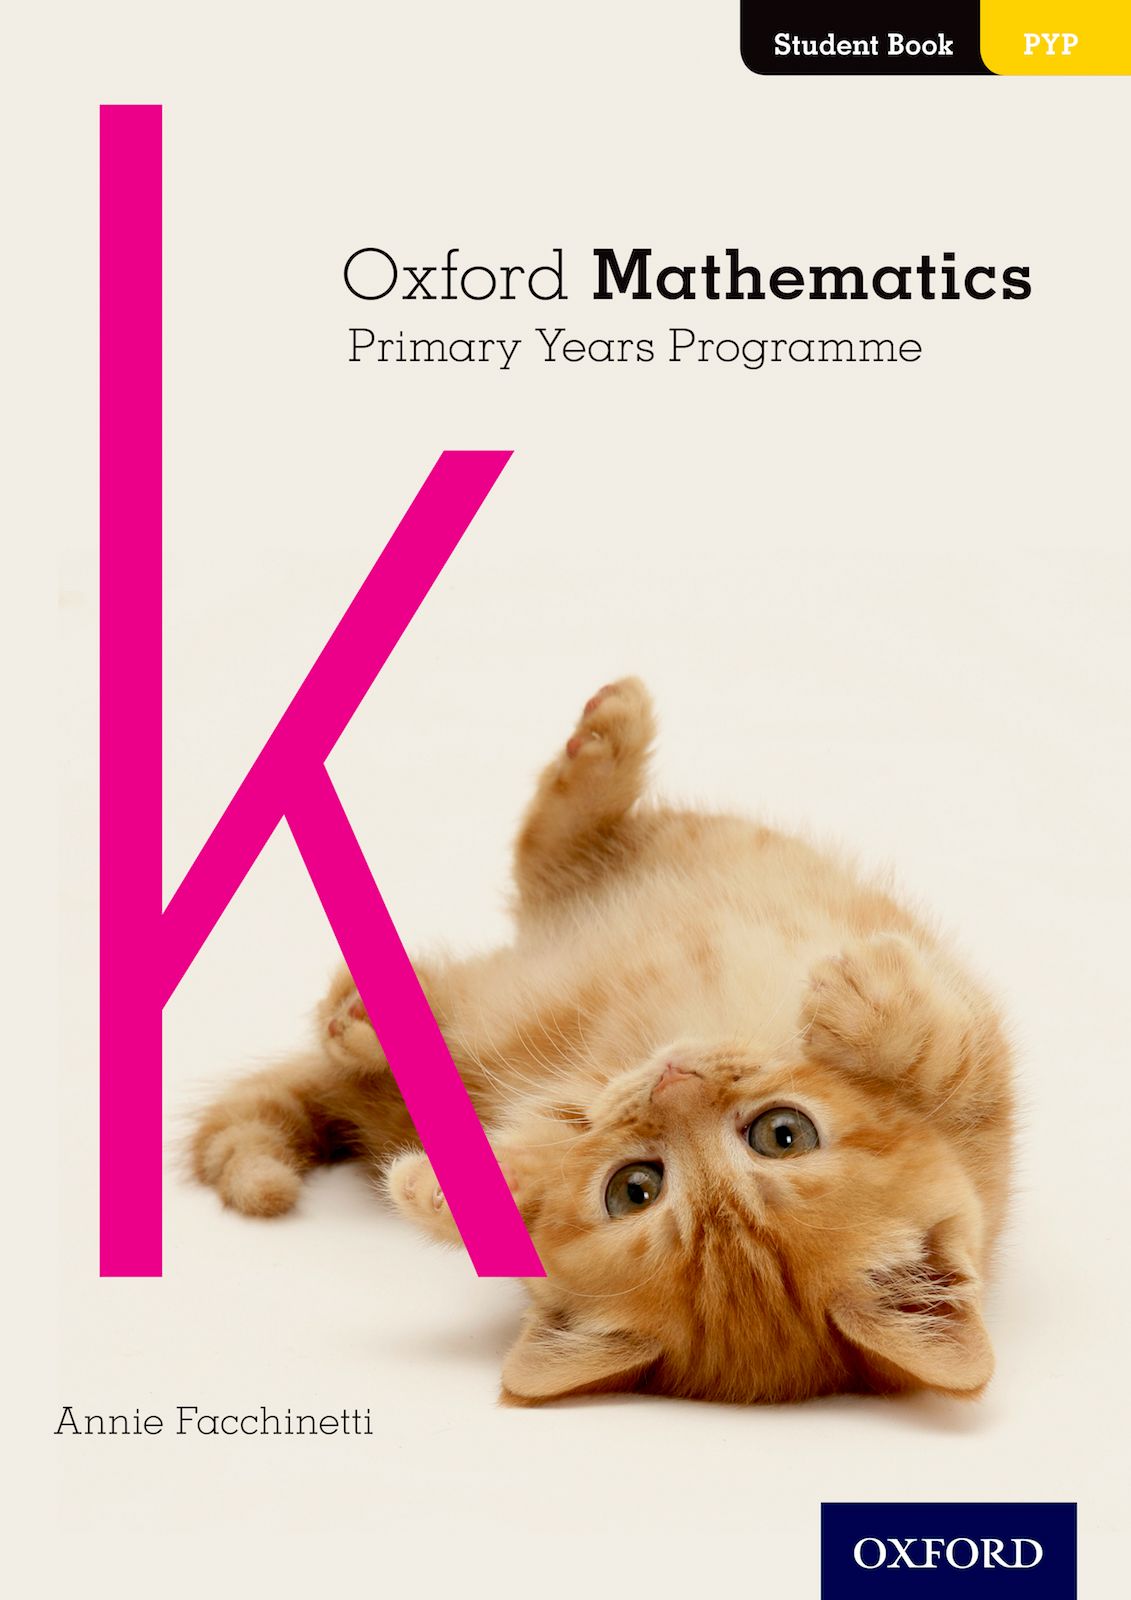 Featured image for “Oxford Mathematics Primary Years Programme Student Book K”